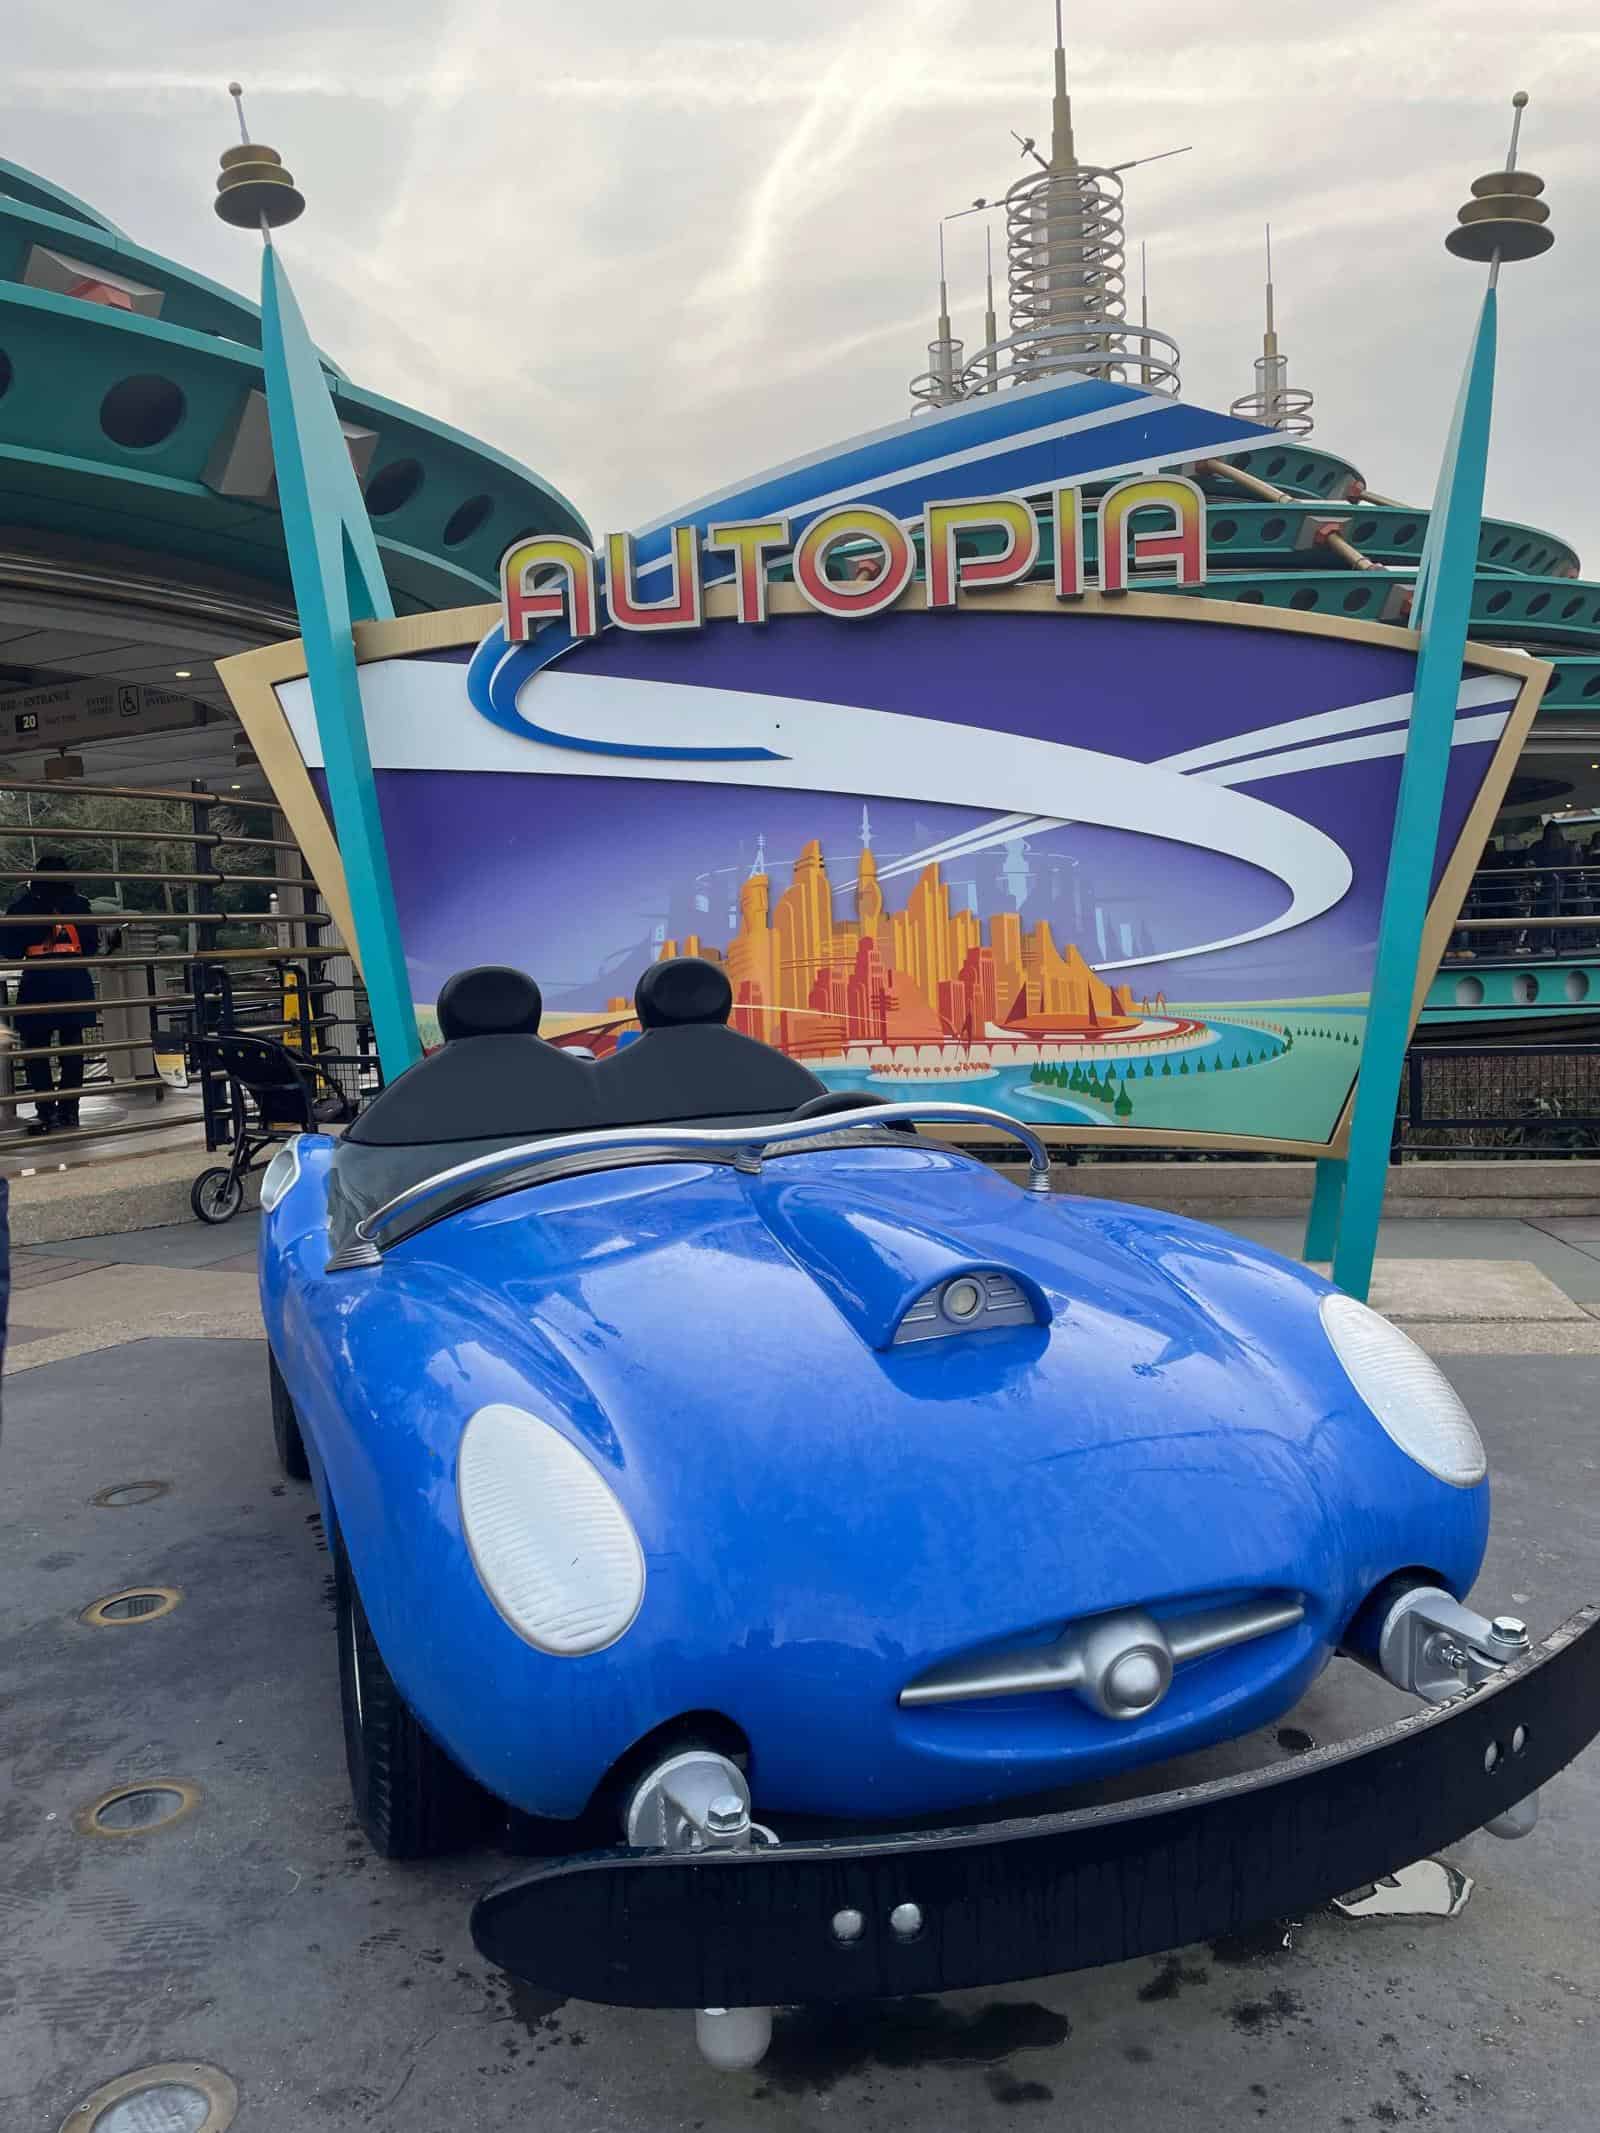 Car from the Autopia ride at Disneyland Paris in front of the sign for the ride